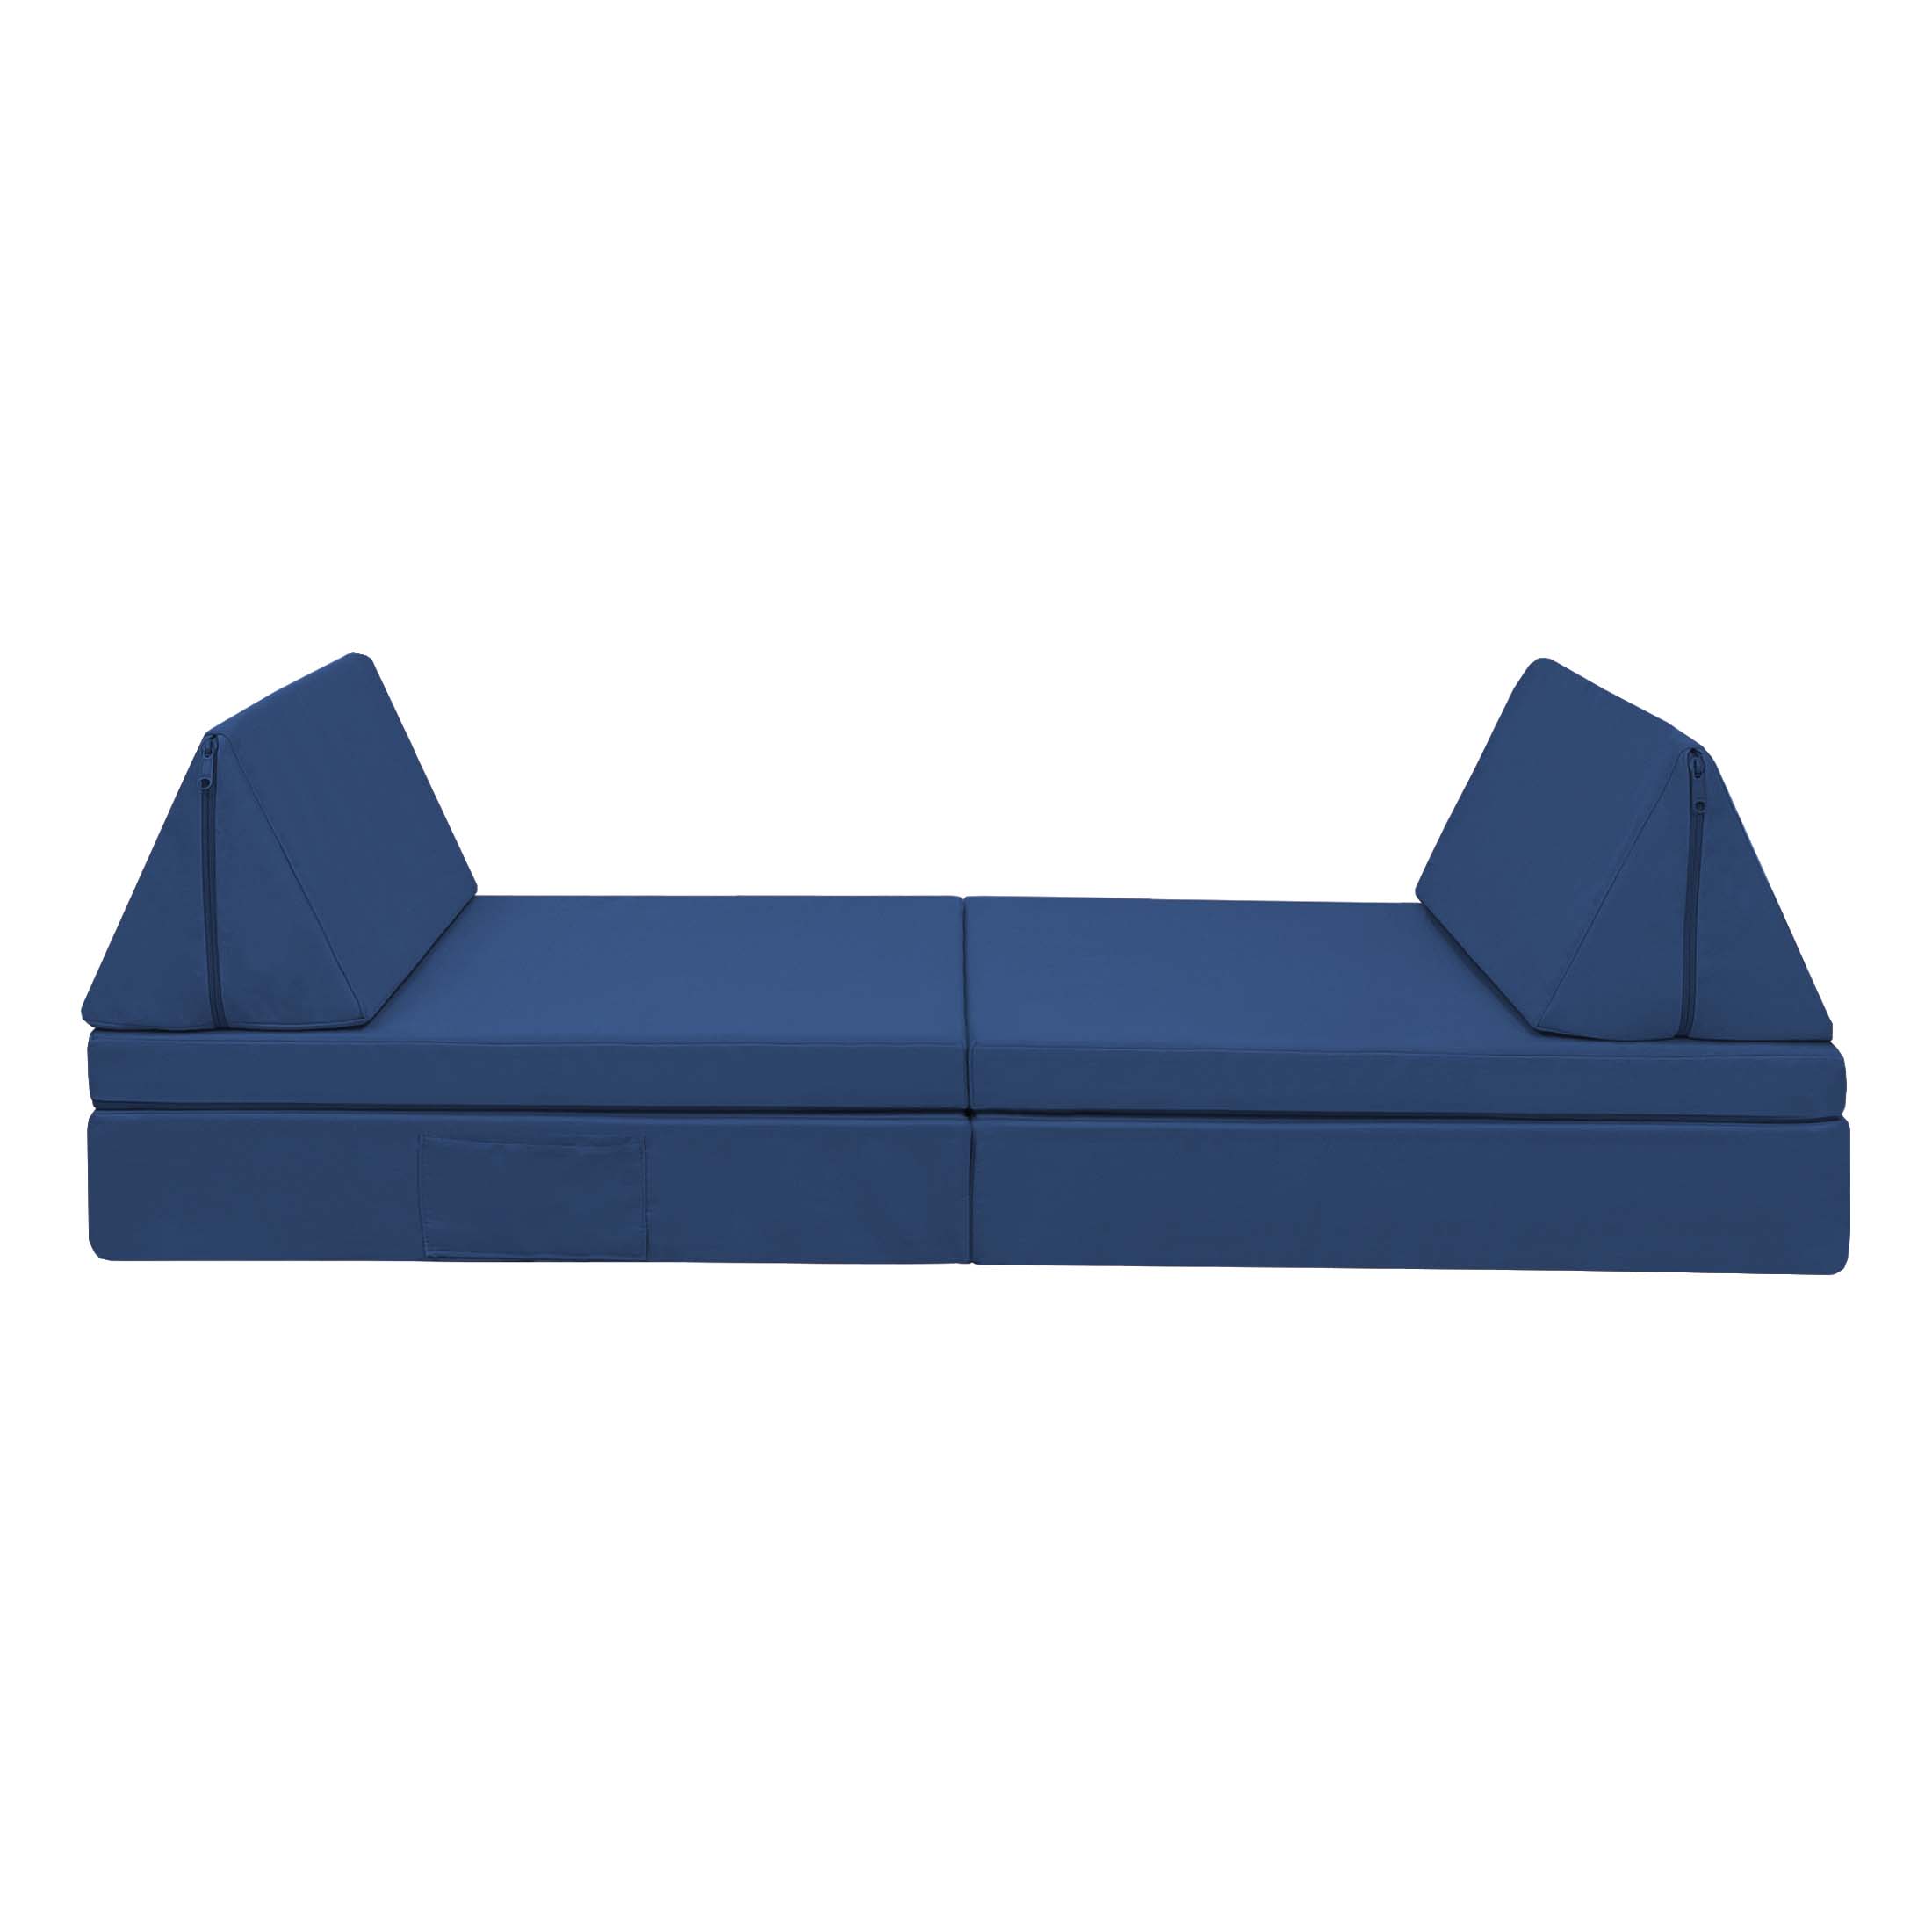 Imaginarium Kids and Toddler Play Couch, Small, Navy Blue, 15 in. x 16 in. x 48 in. - image 3 of 8